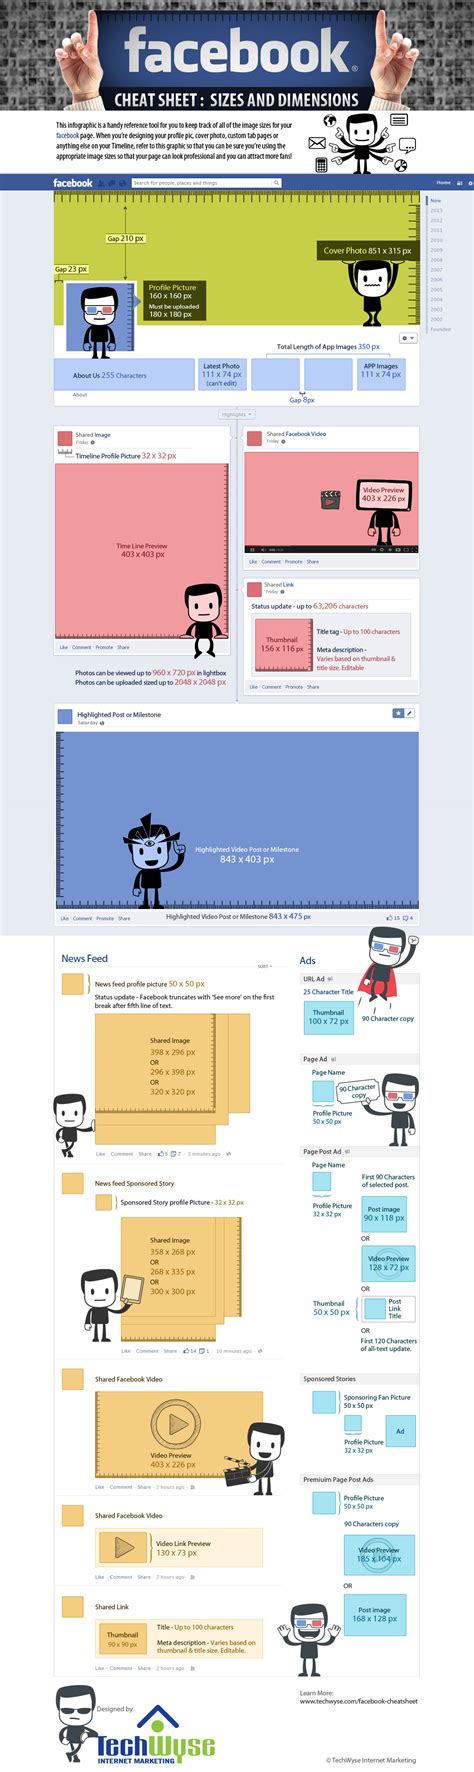 Facebook Cheat Sheet: Image Size and Dimensions [Infographic]